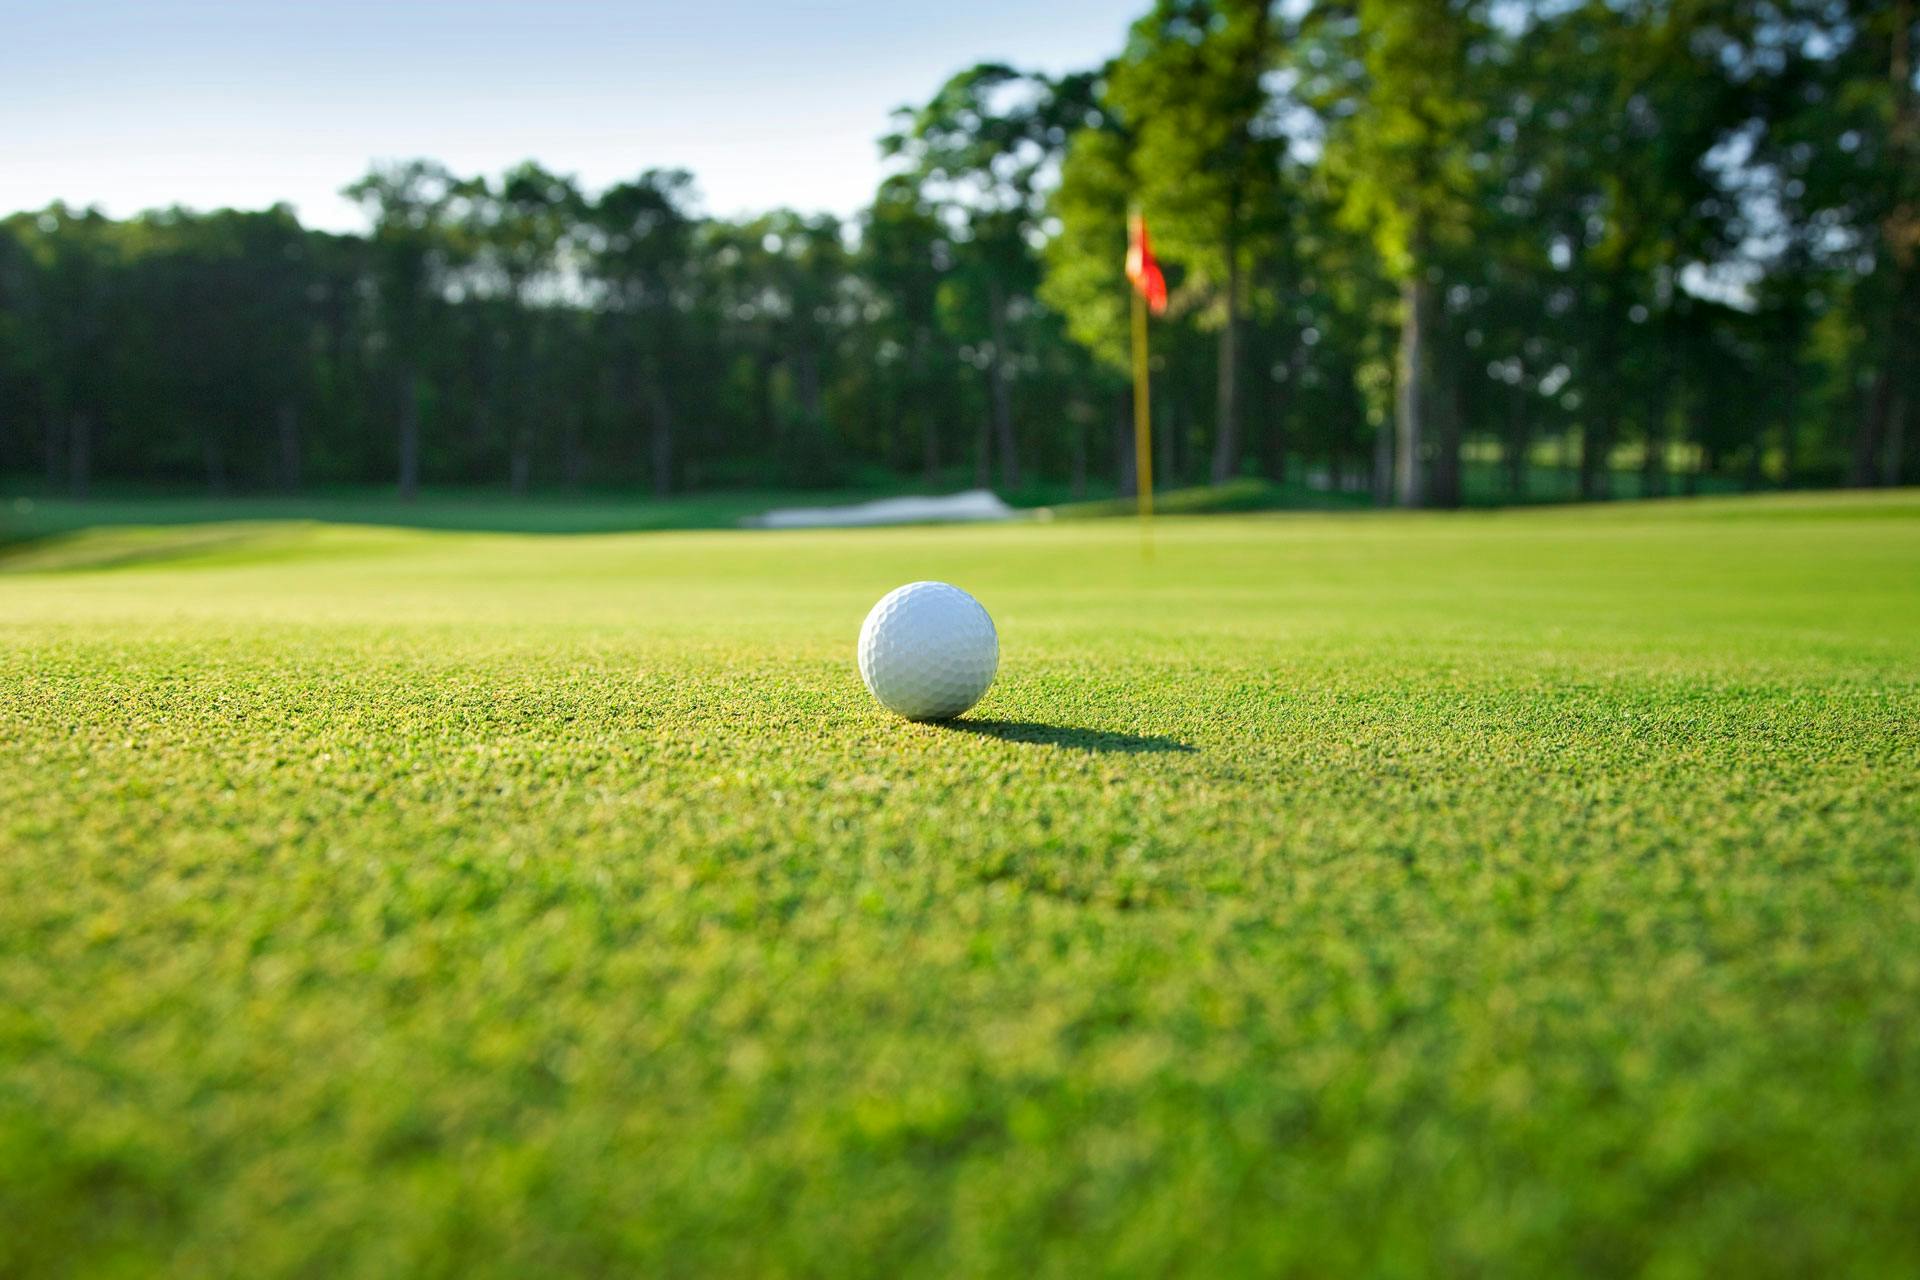 Golf ball on a grassy golf course with a flagstick in the distant background